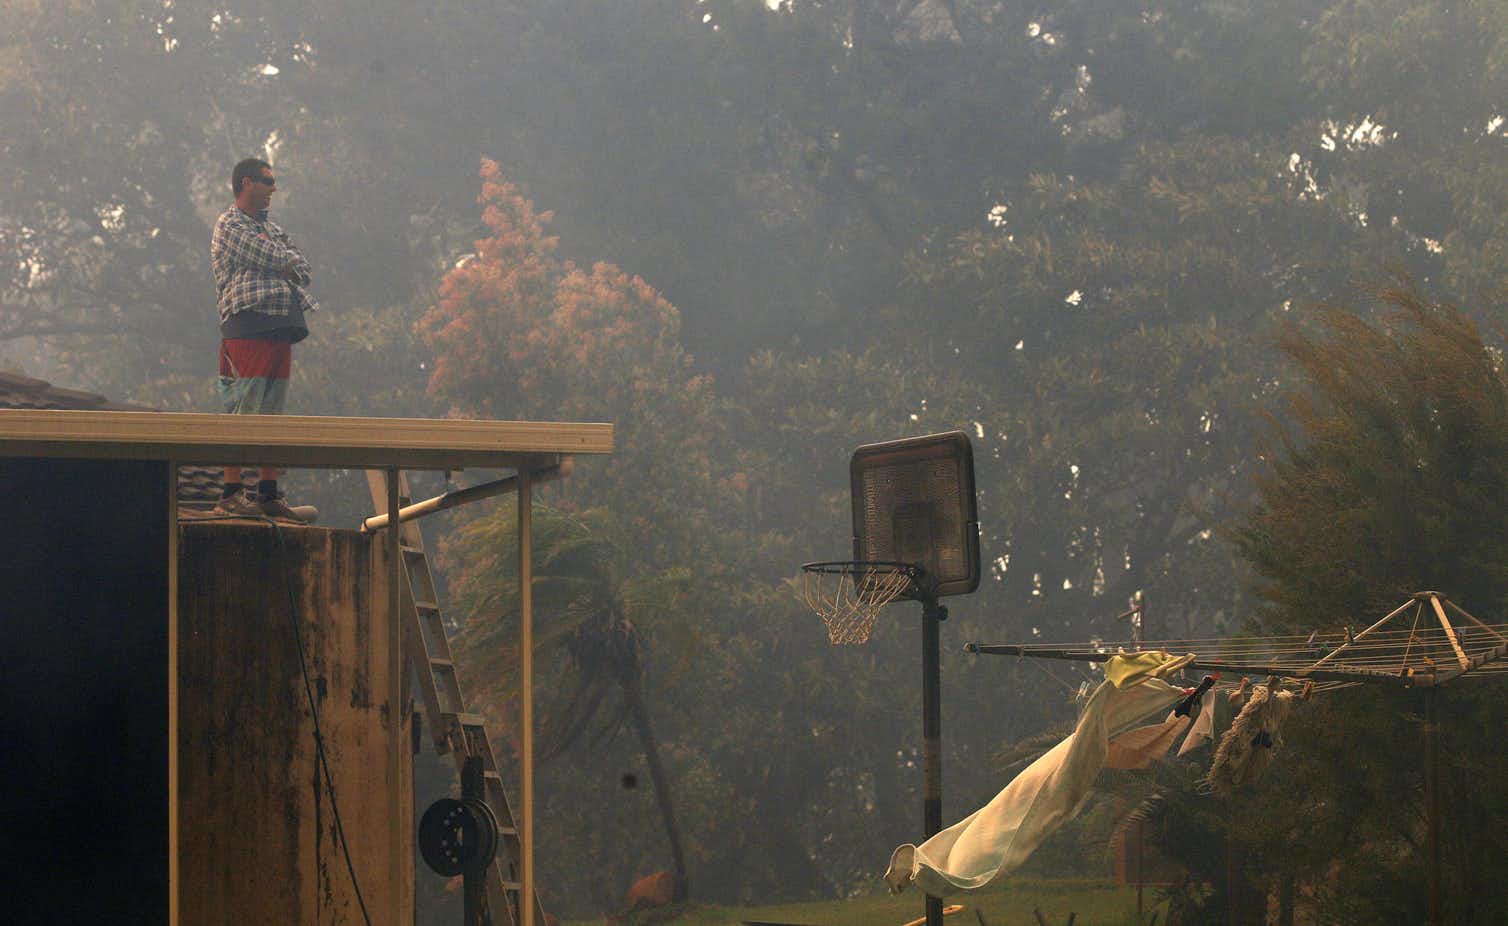 An image of a man standing on his roof looking out at his garden in bushfire smoke.